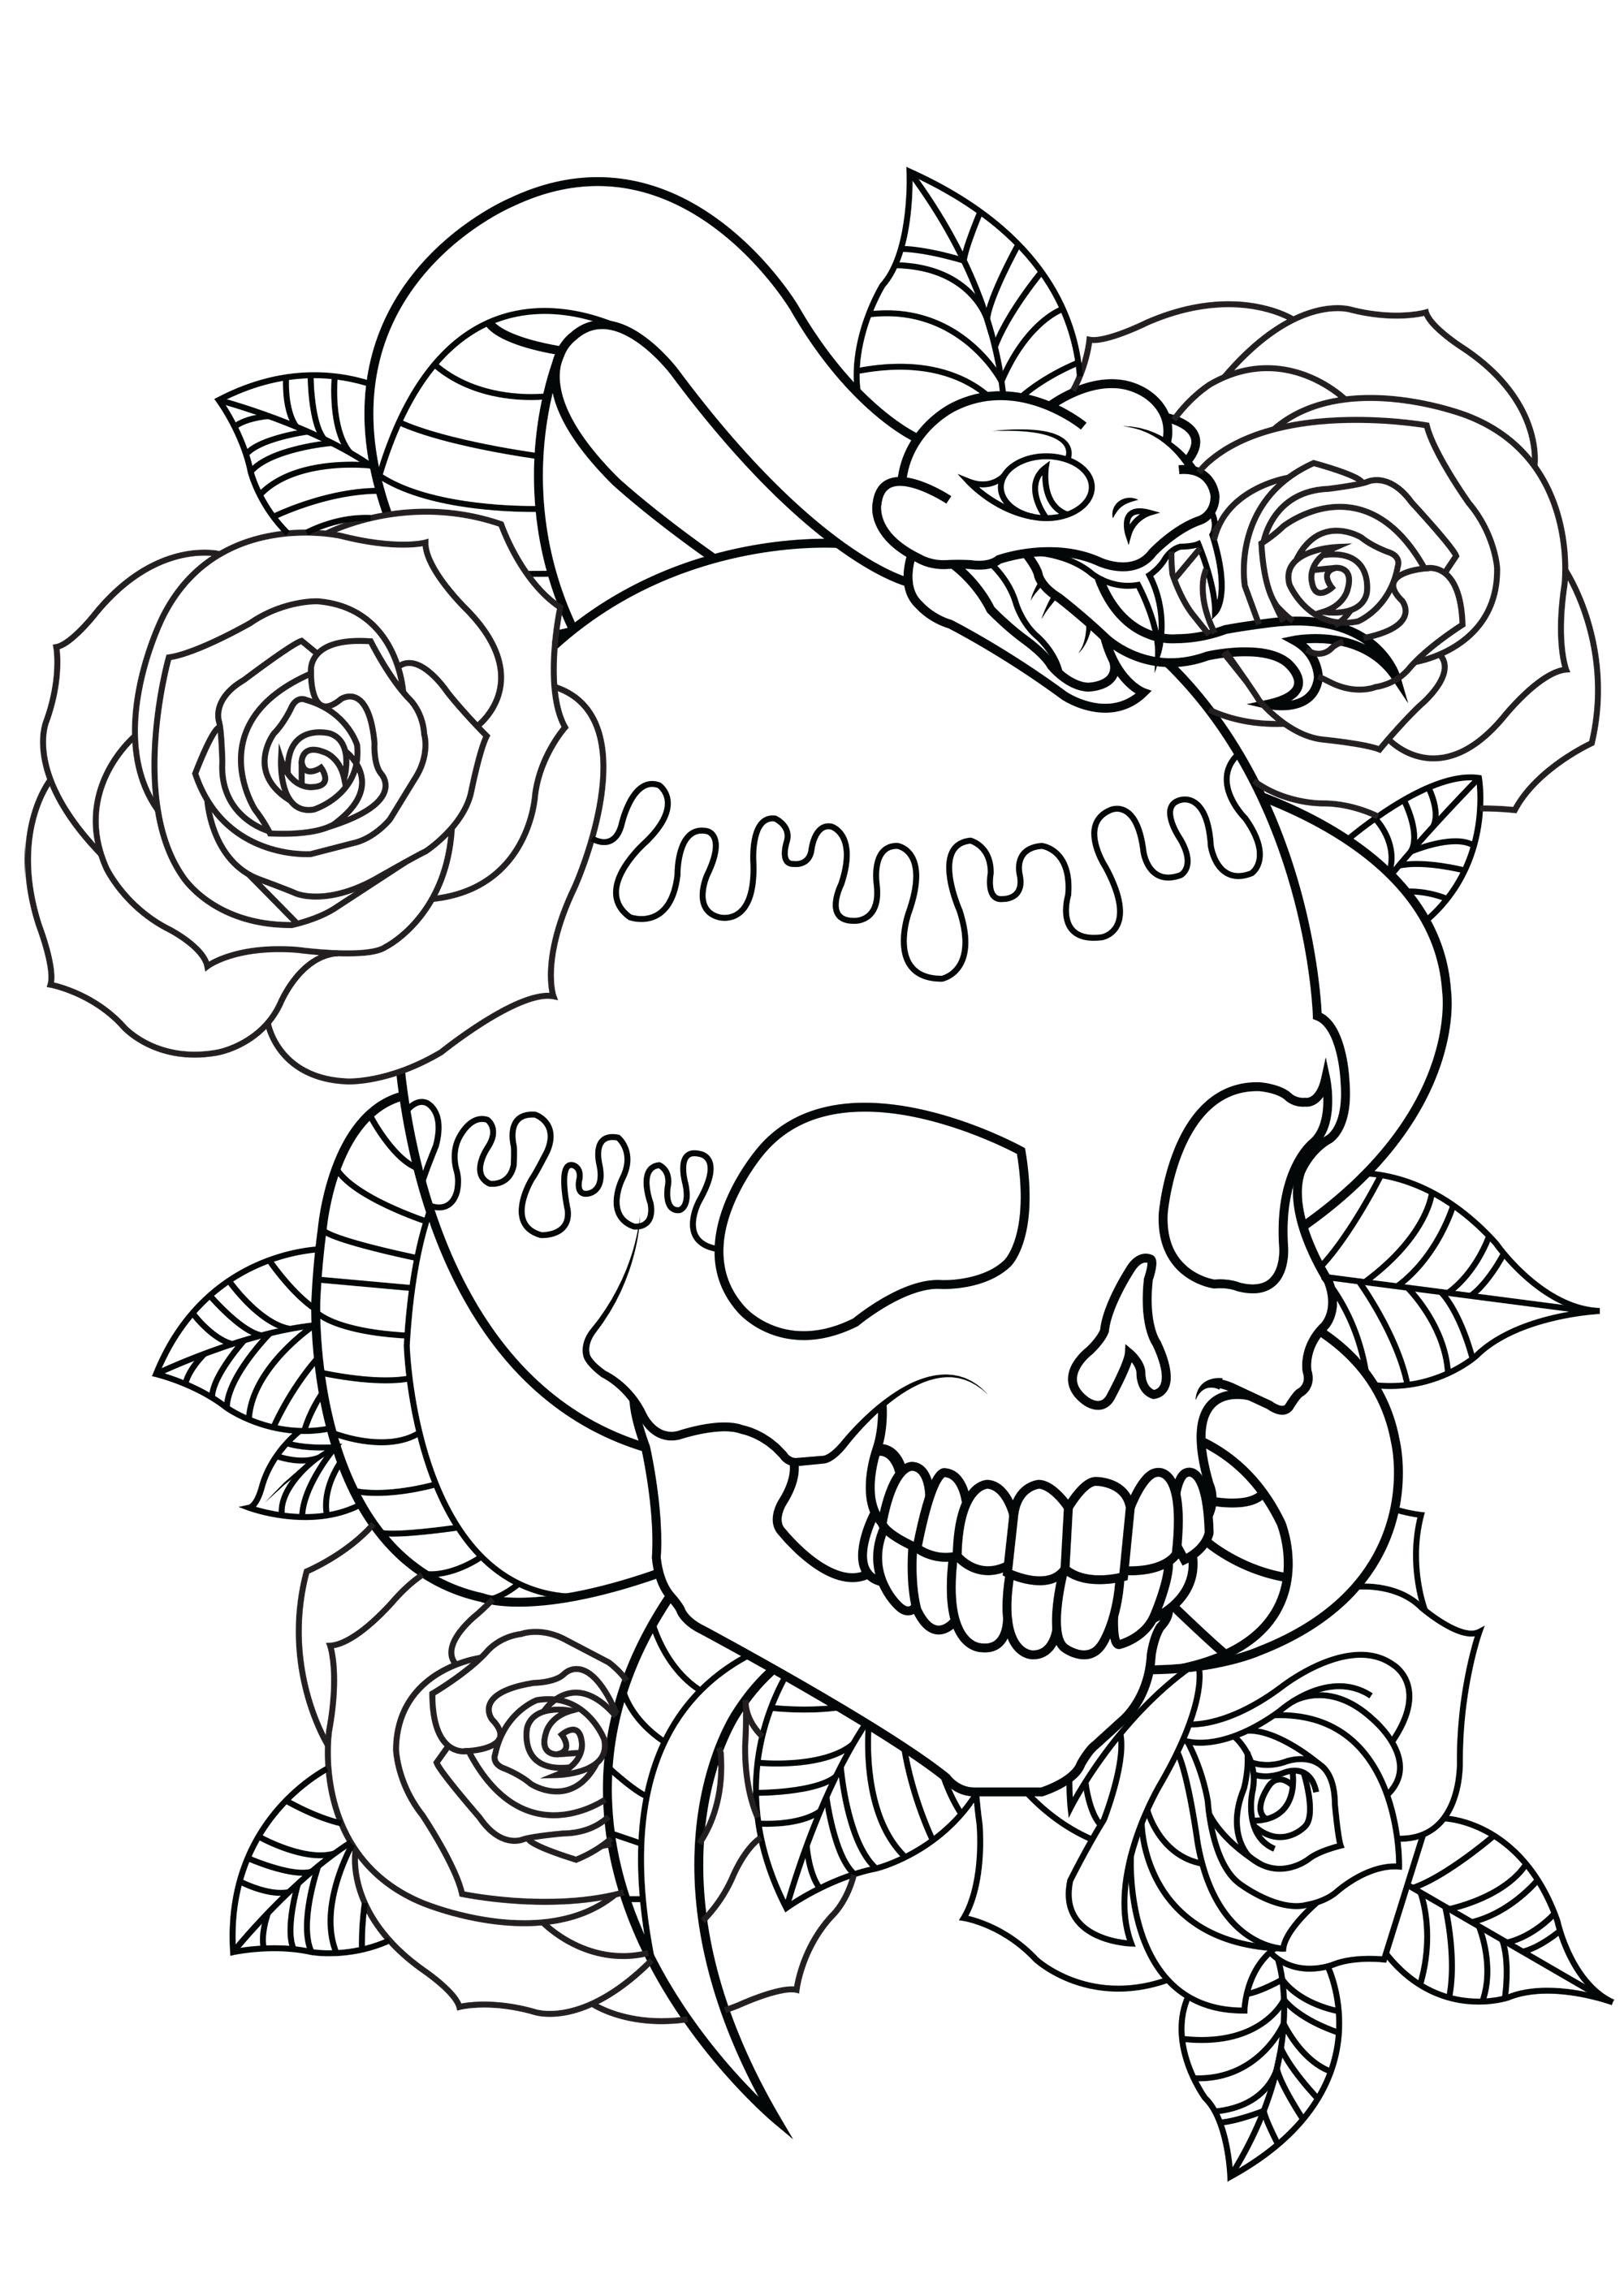 Bears Coloring Pages Coloring Pages Amazing Grateful Bears Coloring Pages Image